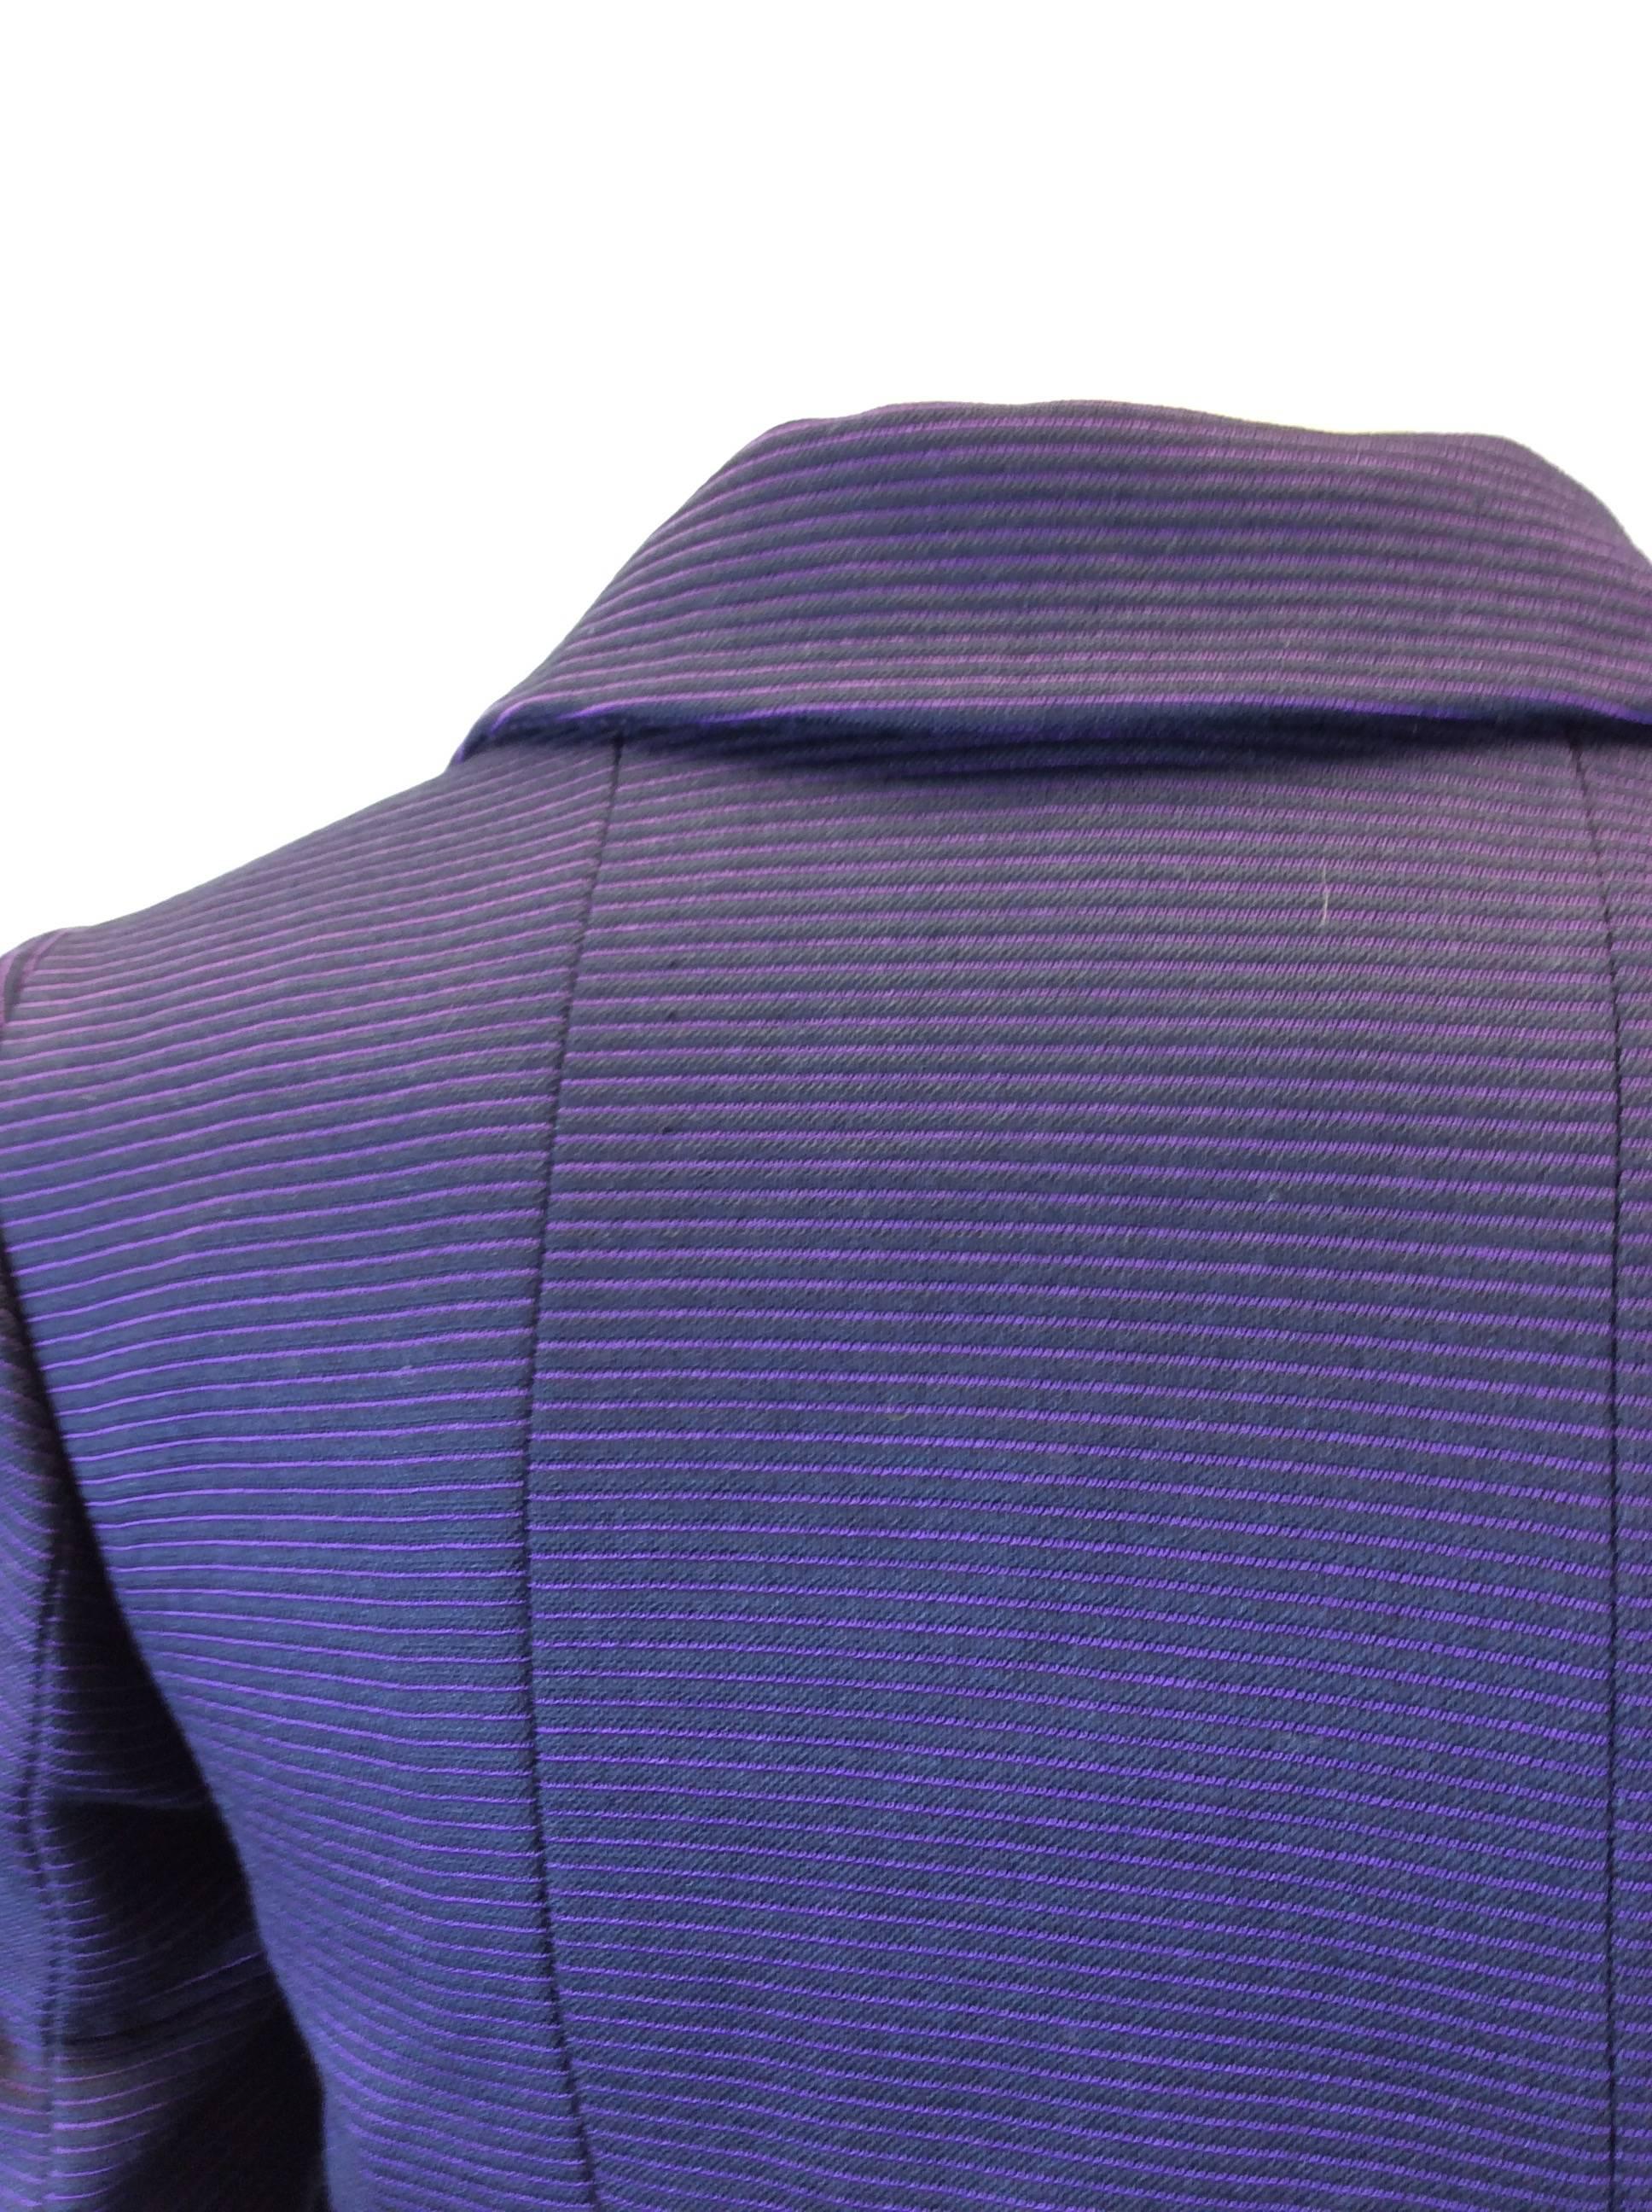 HOLIDAY FLASH SALE! 50% Off! Chanel Two Piece Purple Skirt Suit Set 1